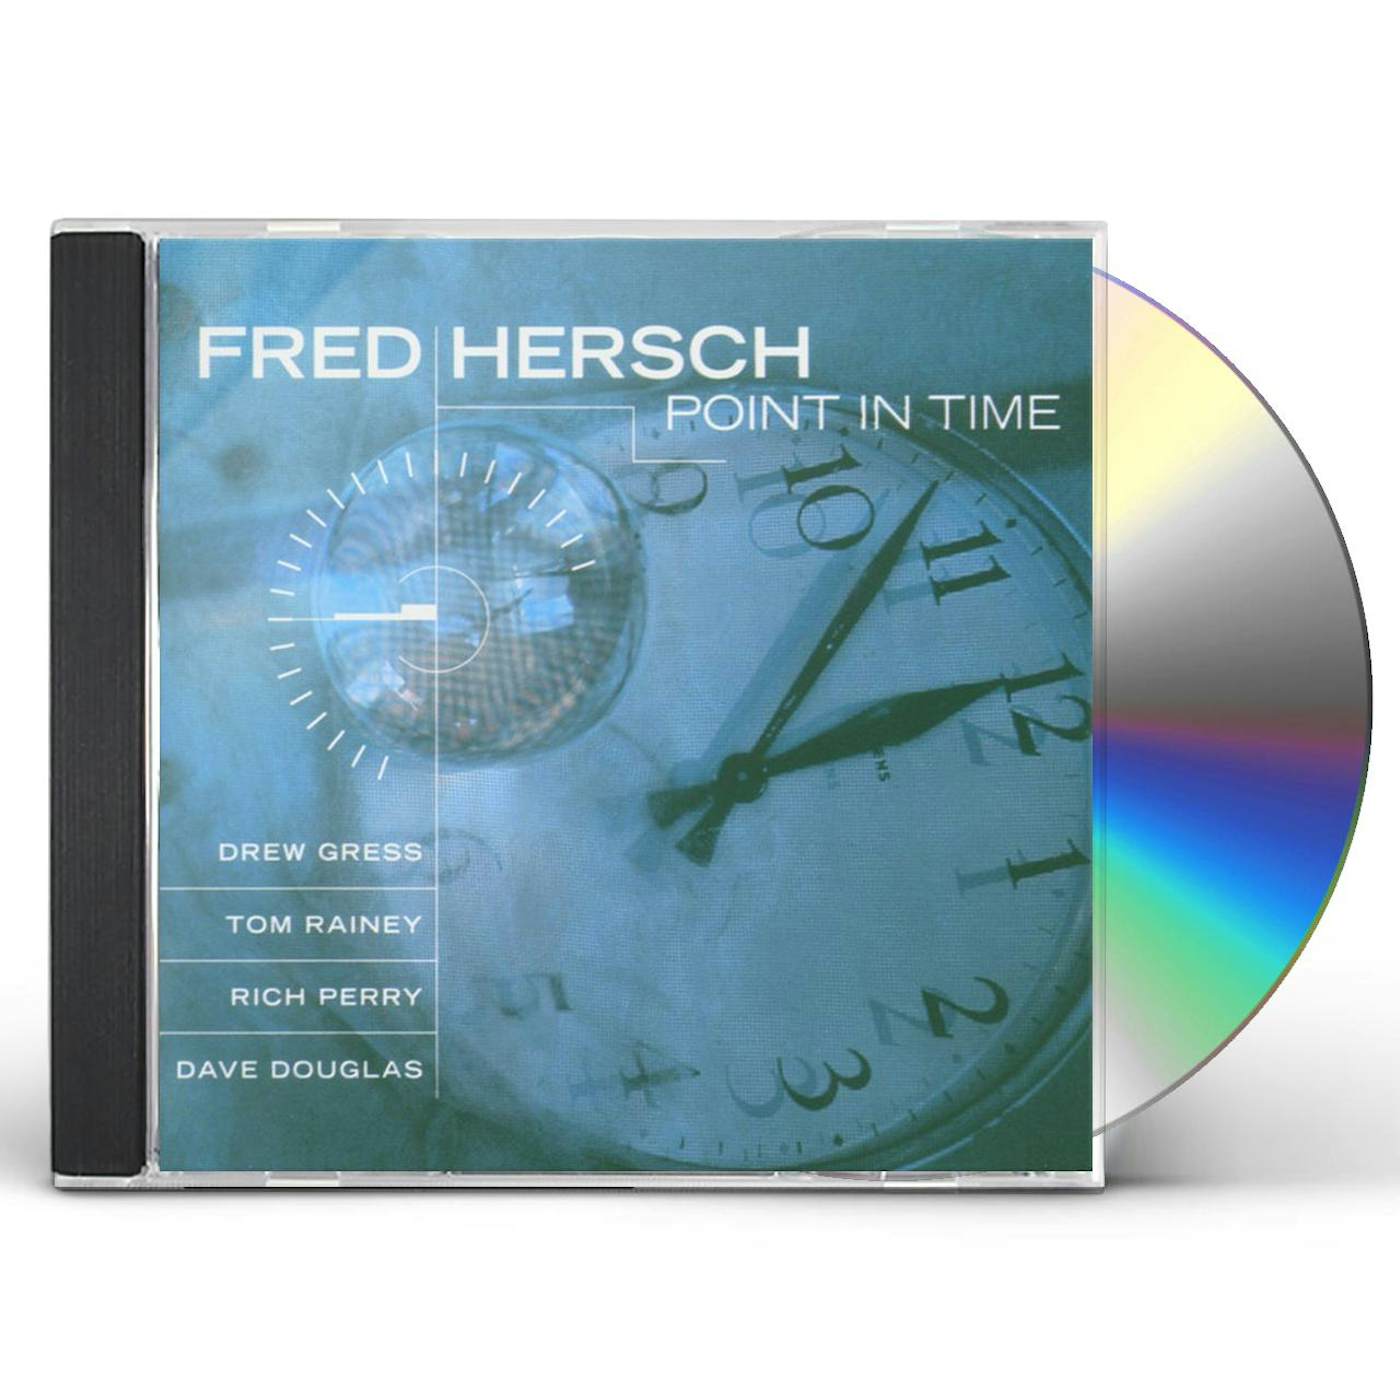 Fred Hersch POINT IN TIME CD